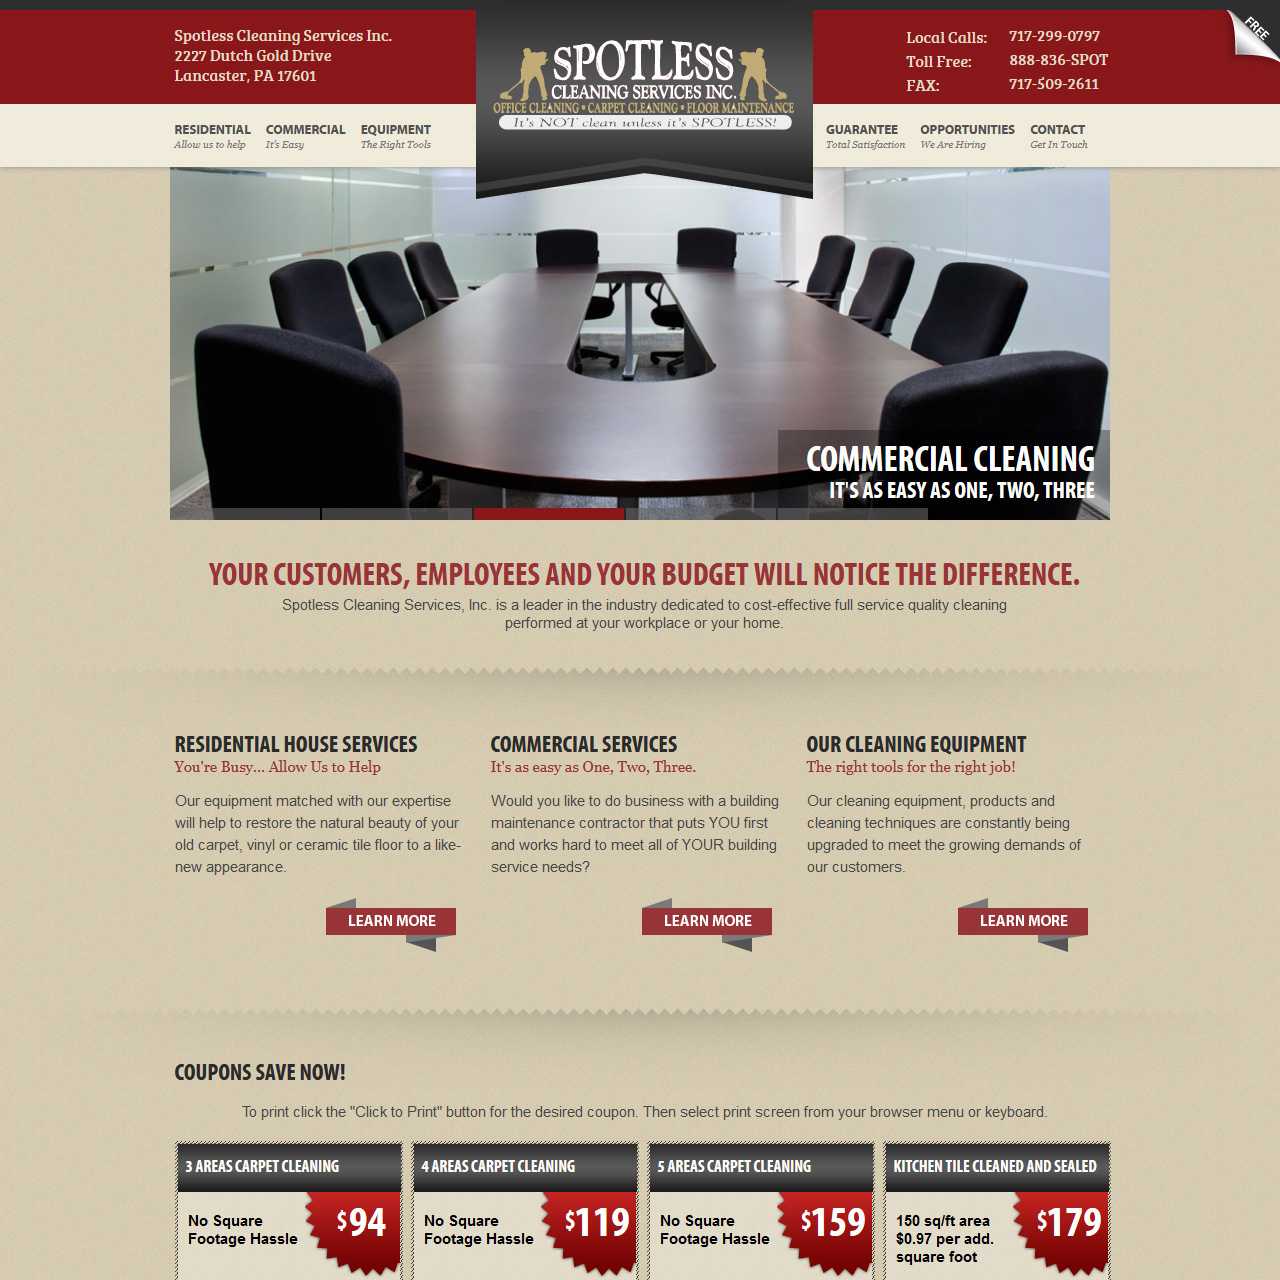 Spotless Cleaning Services Inc. - Cleaning service website design